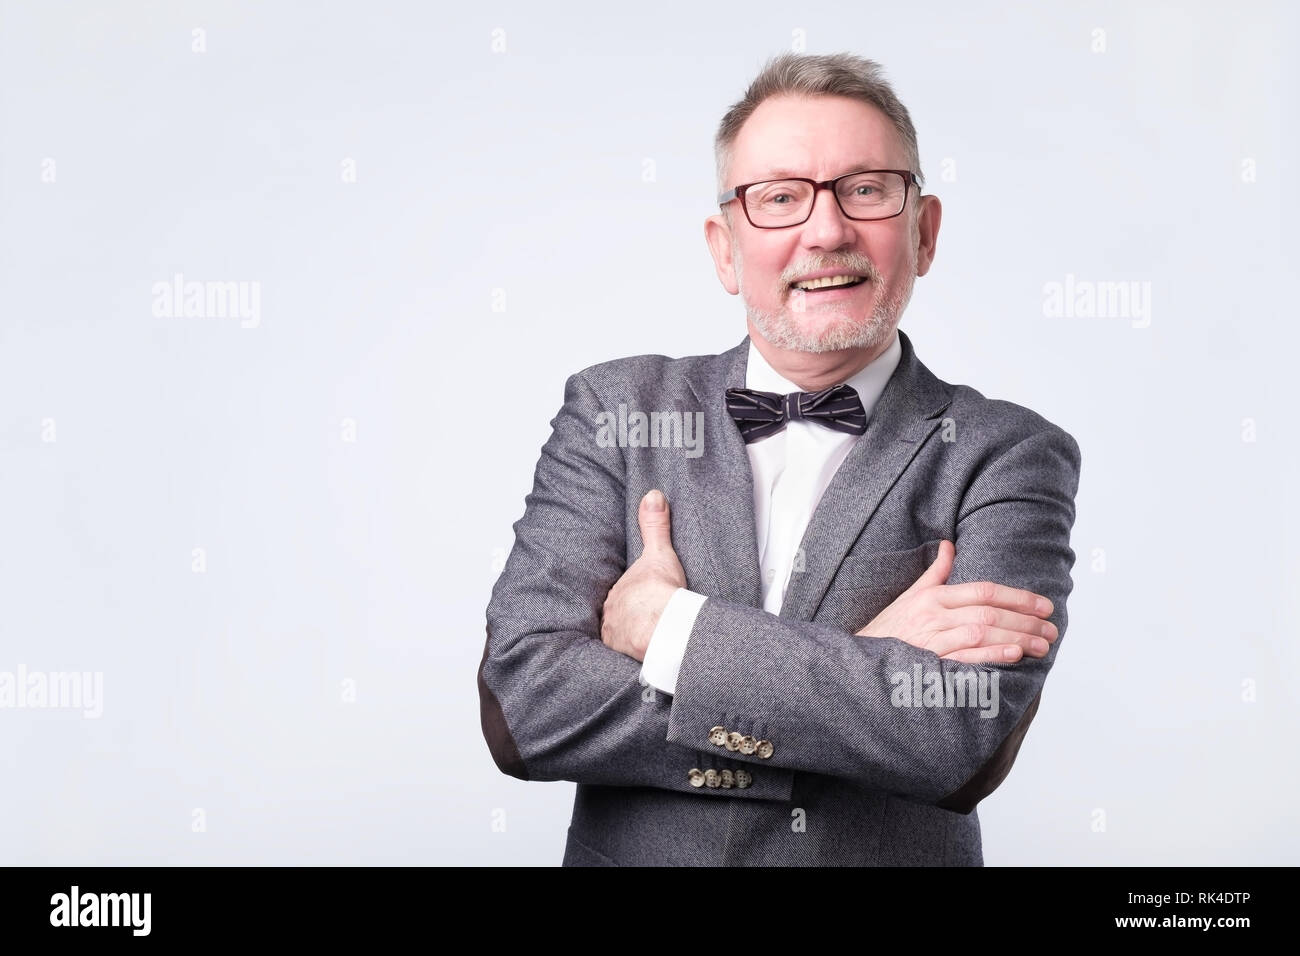 Senior businessman in suit and bow tie posing with folded arms Stock Photo